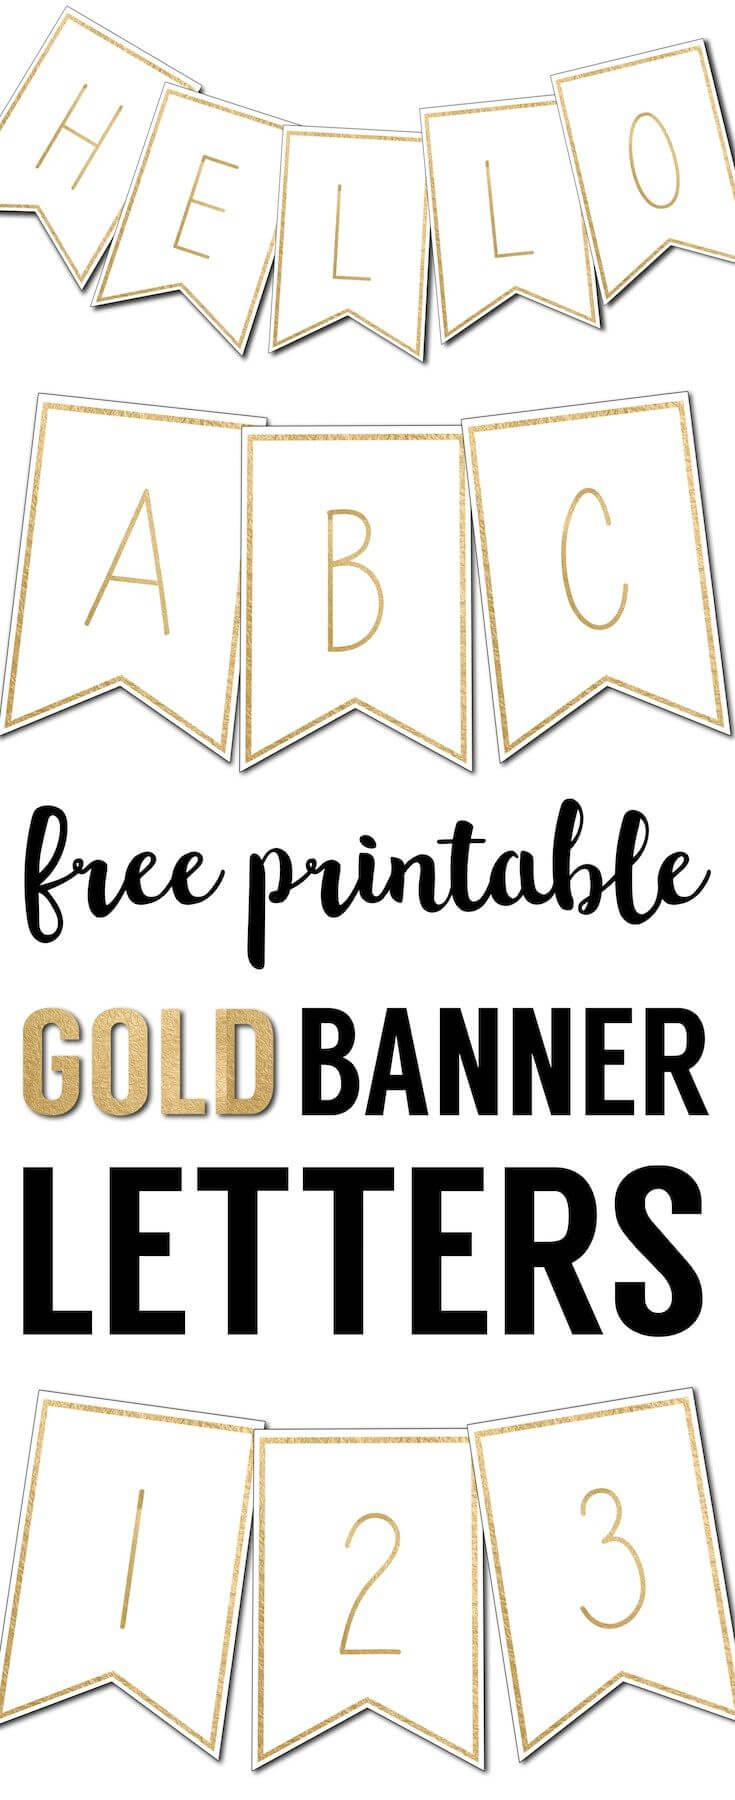 Free Printable Banner Letters Templates | Free Printable Within Free Bridal Shower Banner Template